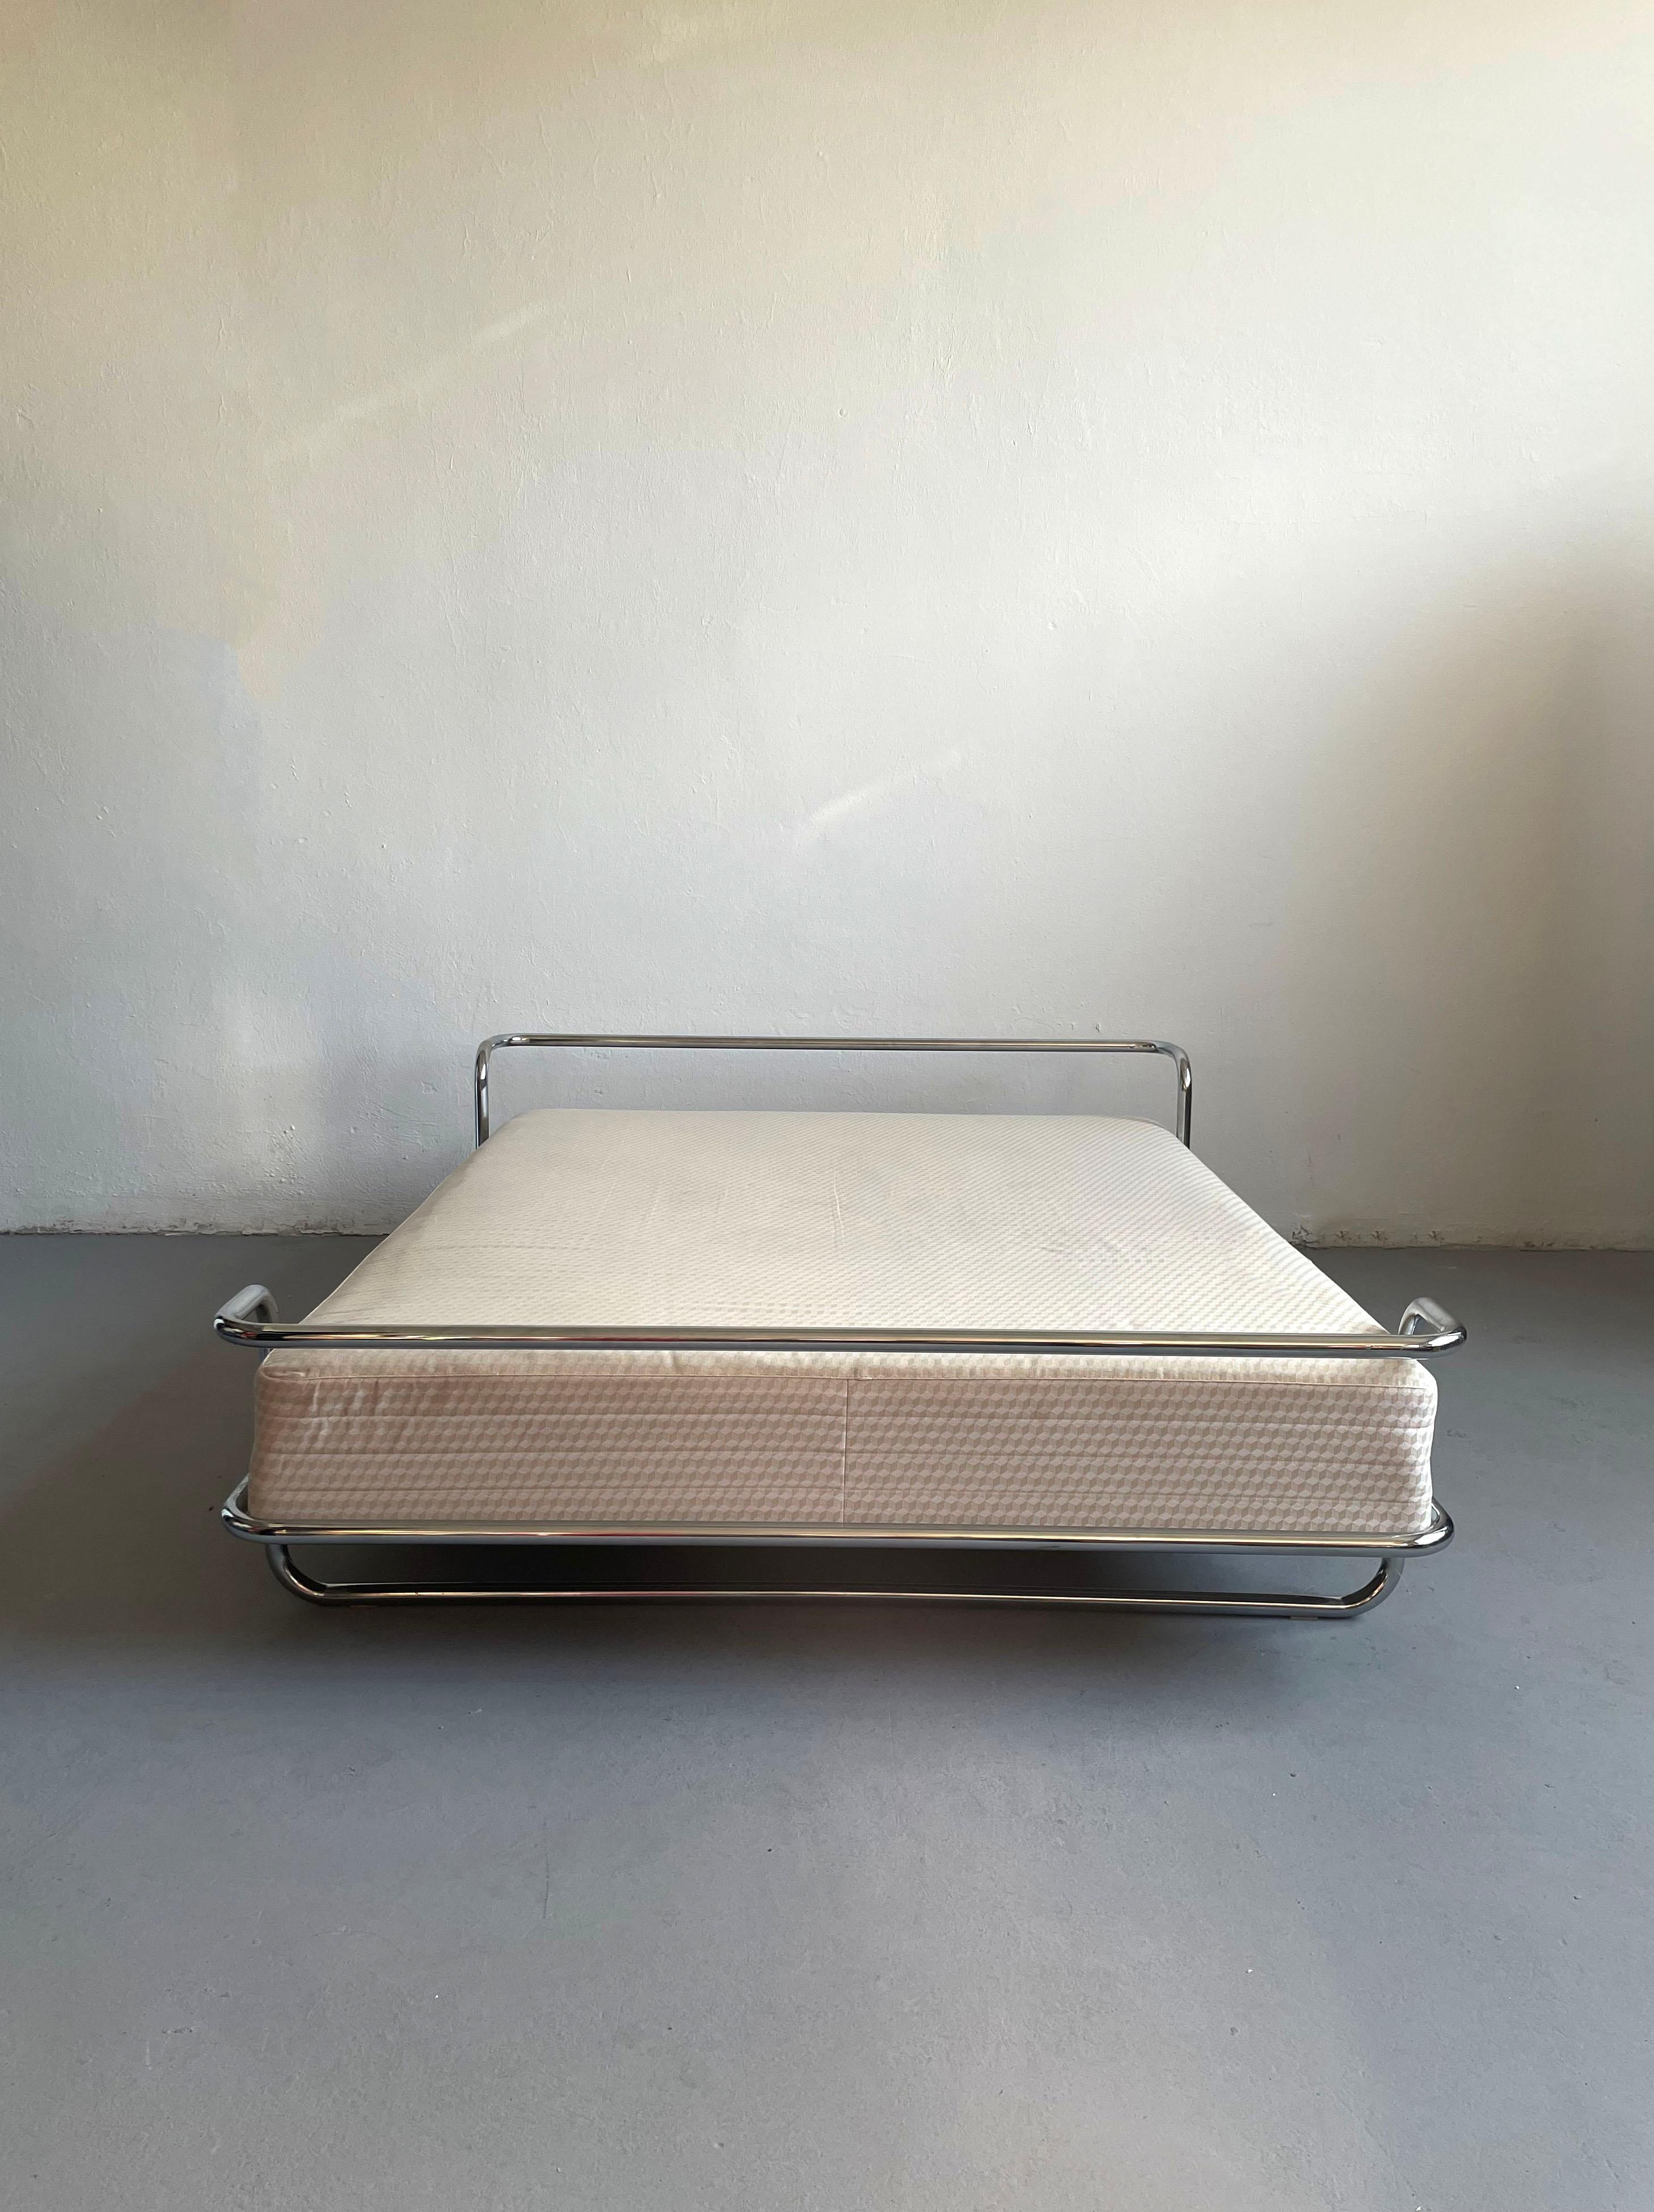 Chrome king-size bed with original SULTAN mattress, designed by Knut Hagberg, c.1982. The modernist form takes clear inspiration from Swedish architect Bruno Mathsson’s 1974 Ulla bed. Designed to compliment the best-selling SULTAN box spring